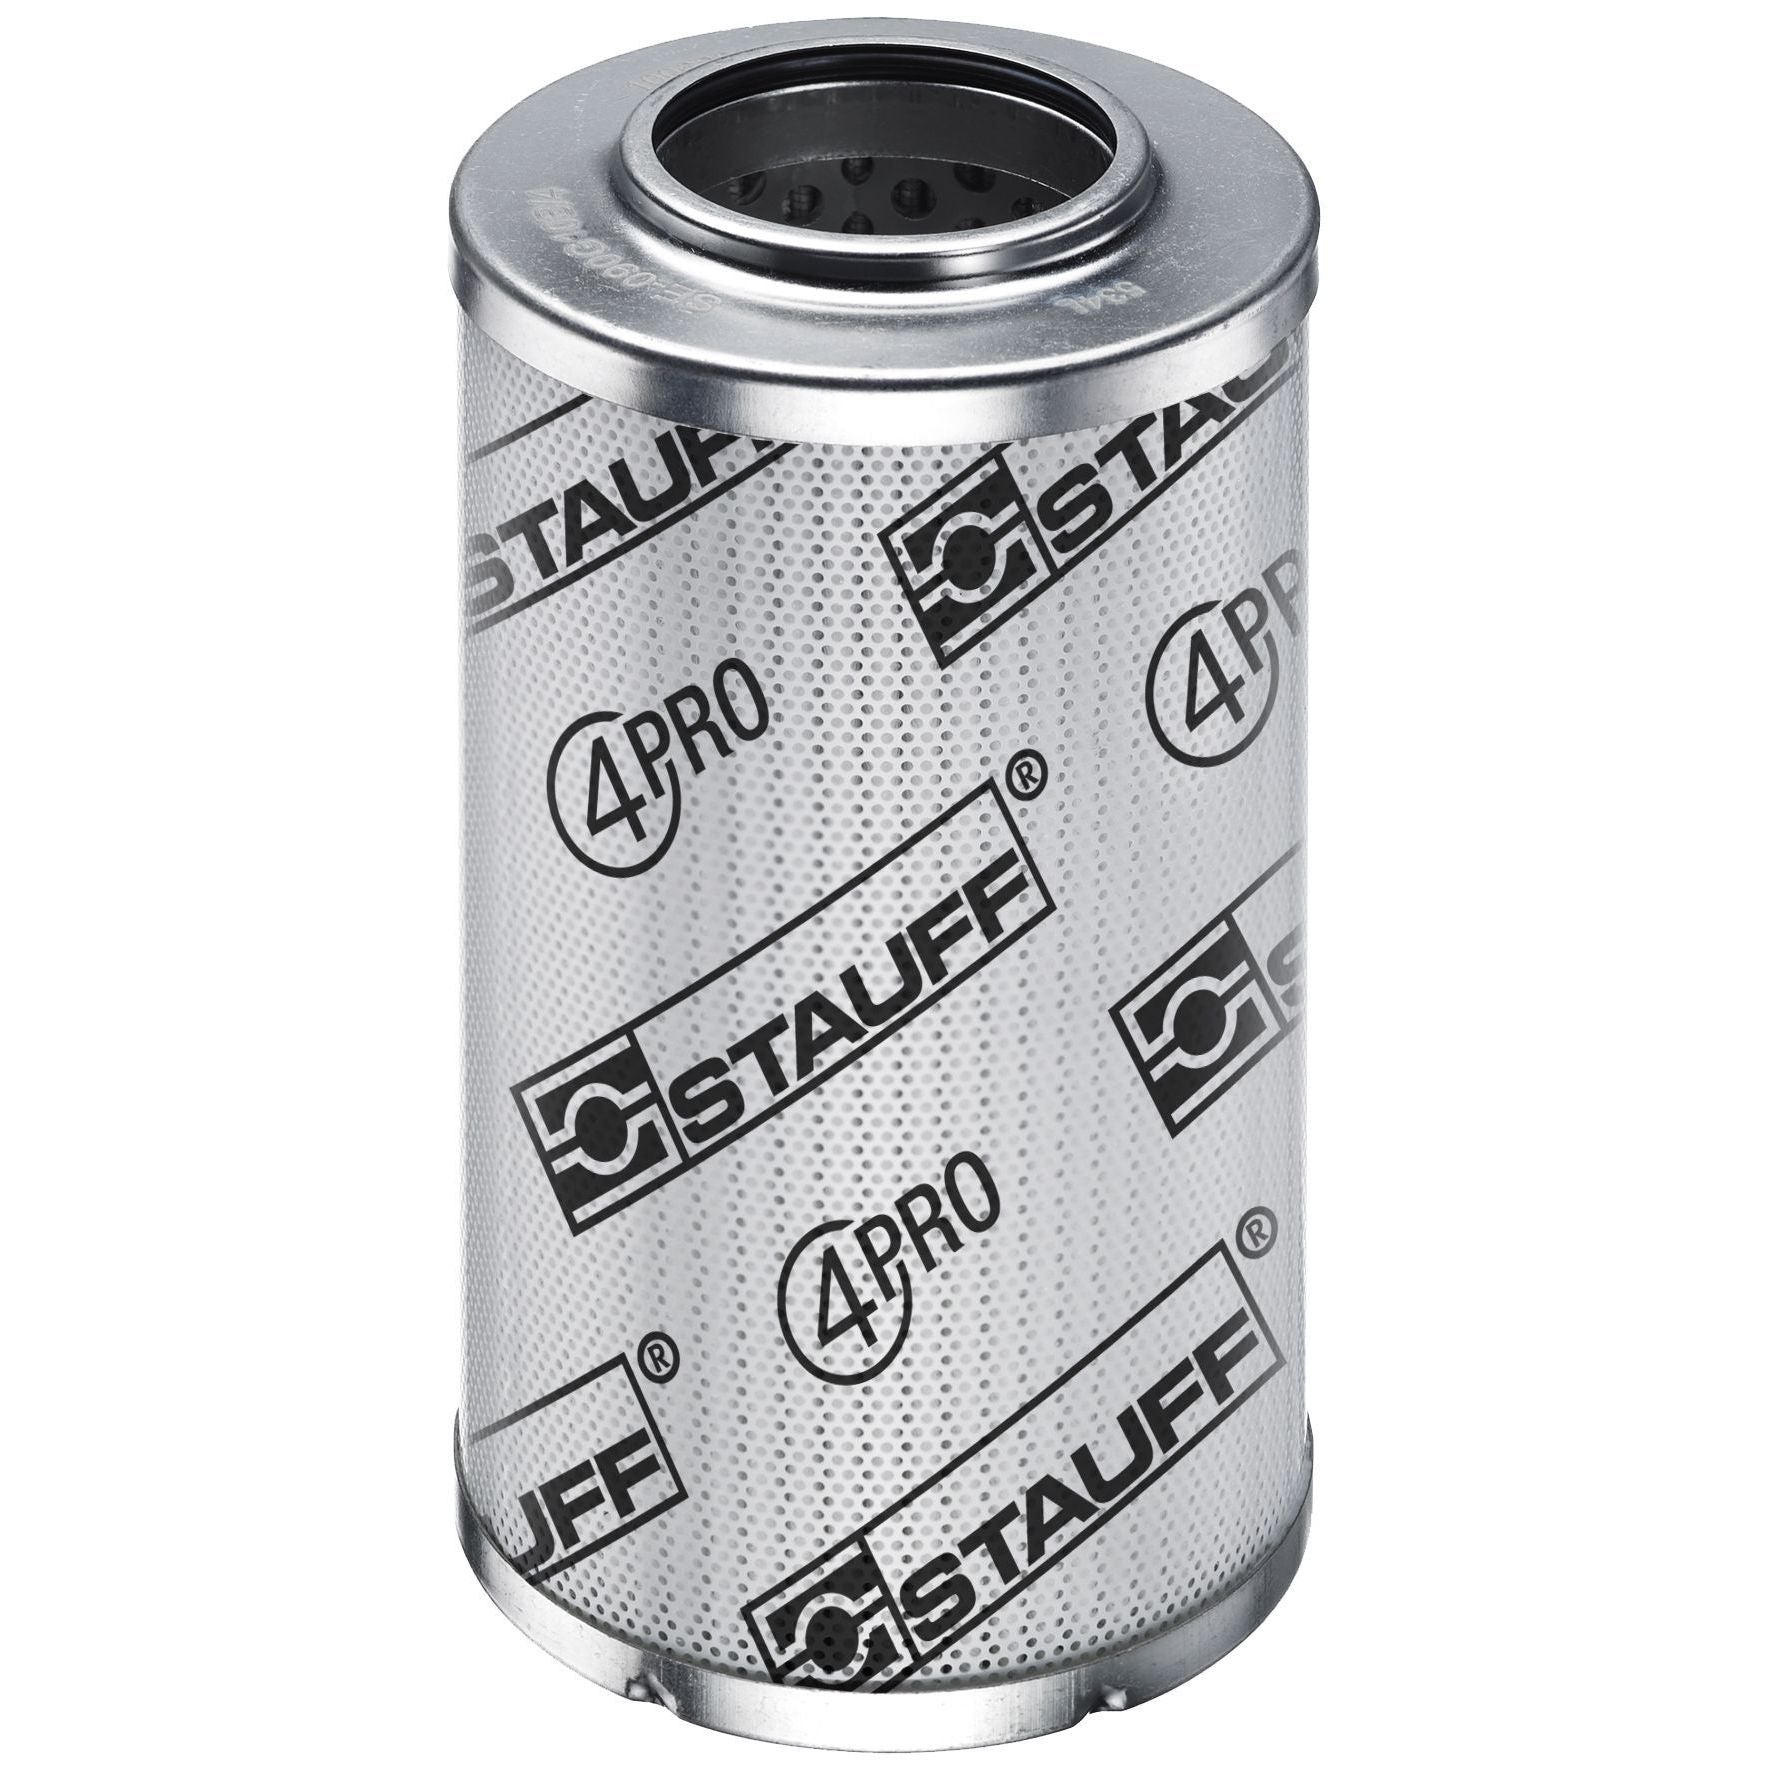 SE-014-H-05-B/4 : Stauff SF-014 Series Filter Element, 5 Micron, Synthetic, 3045psi Collapse Differential, Buna